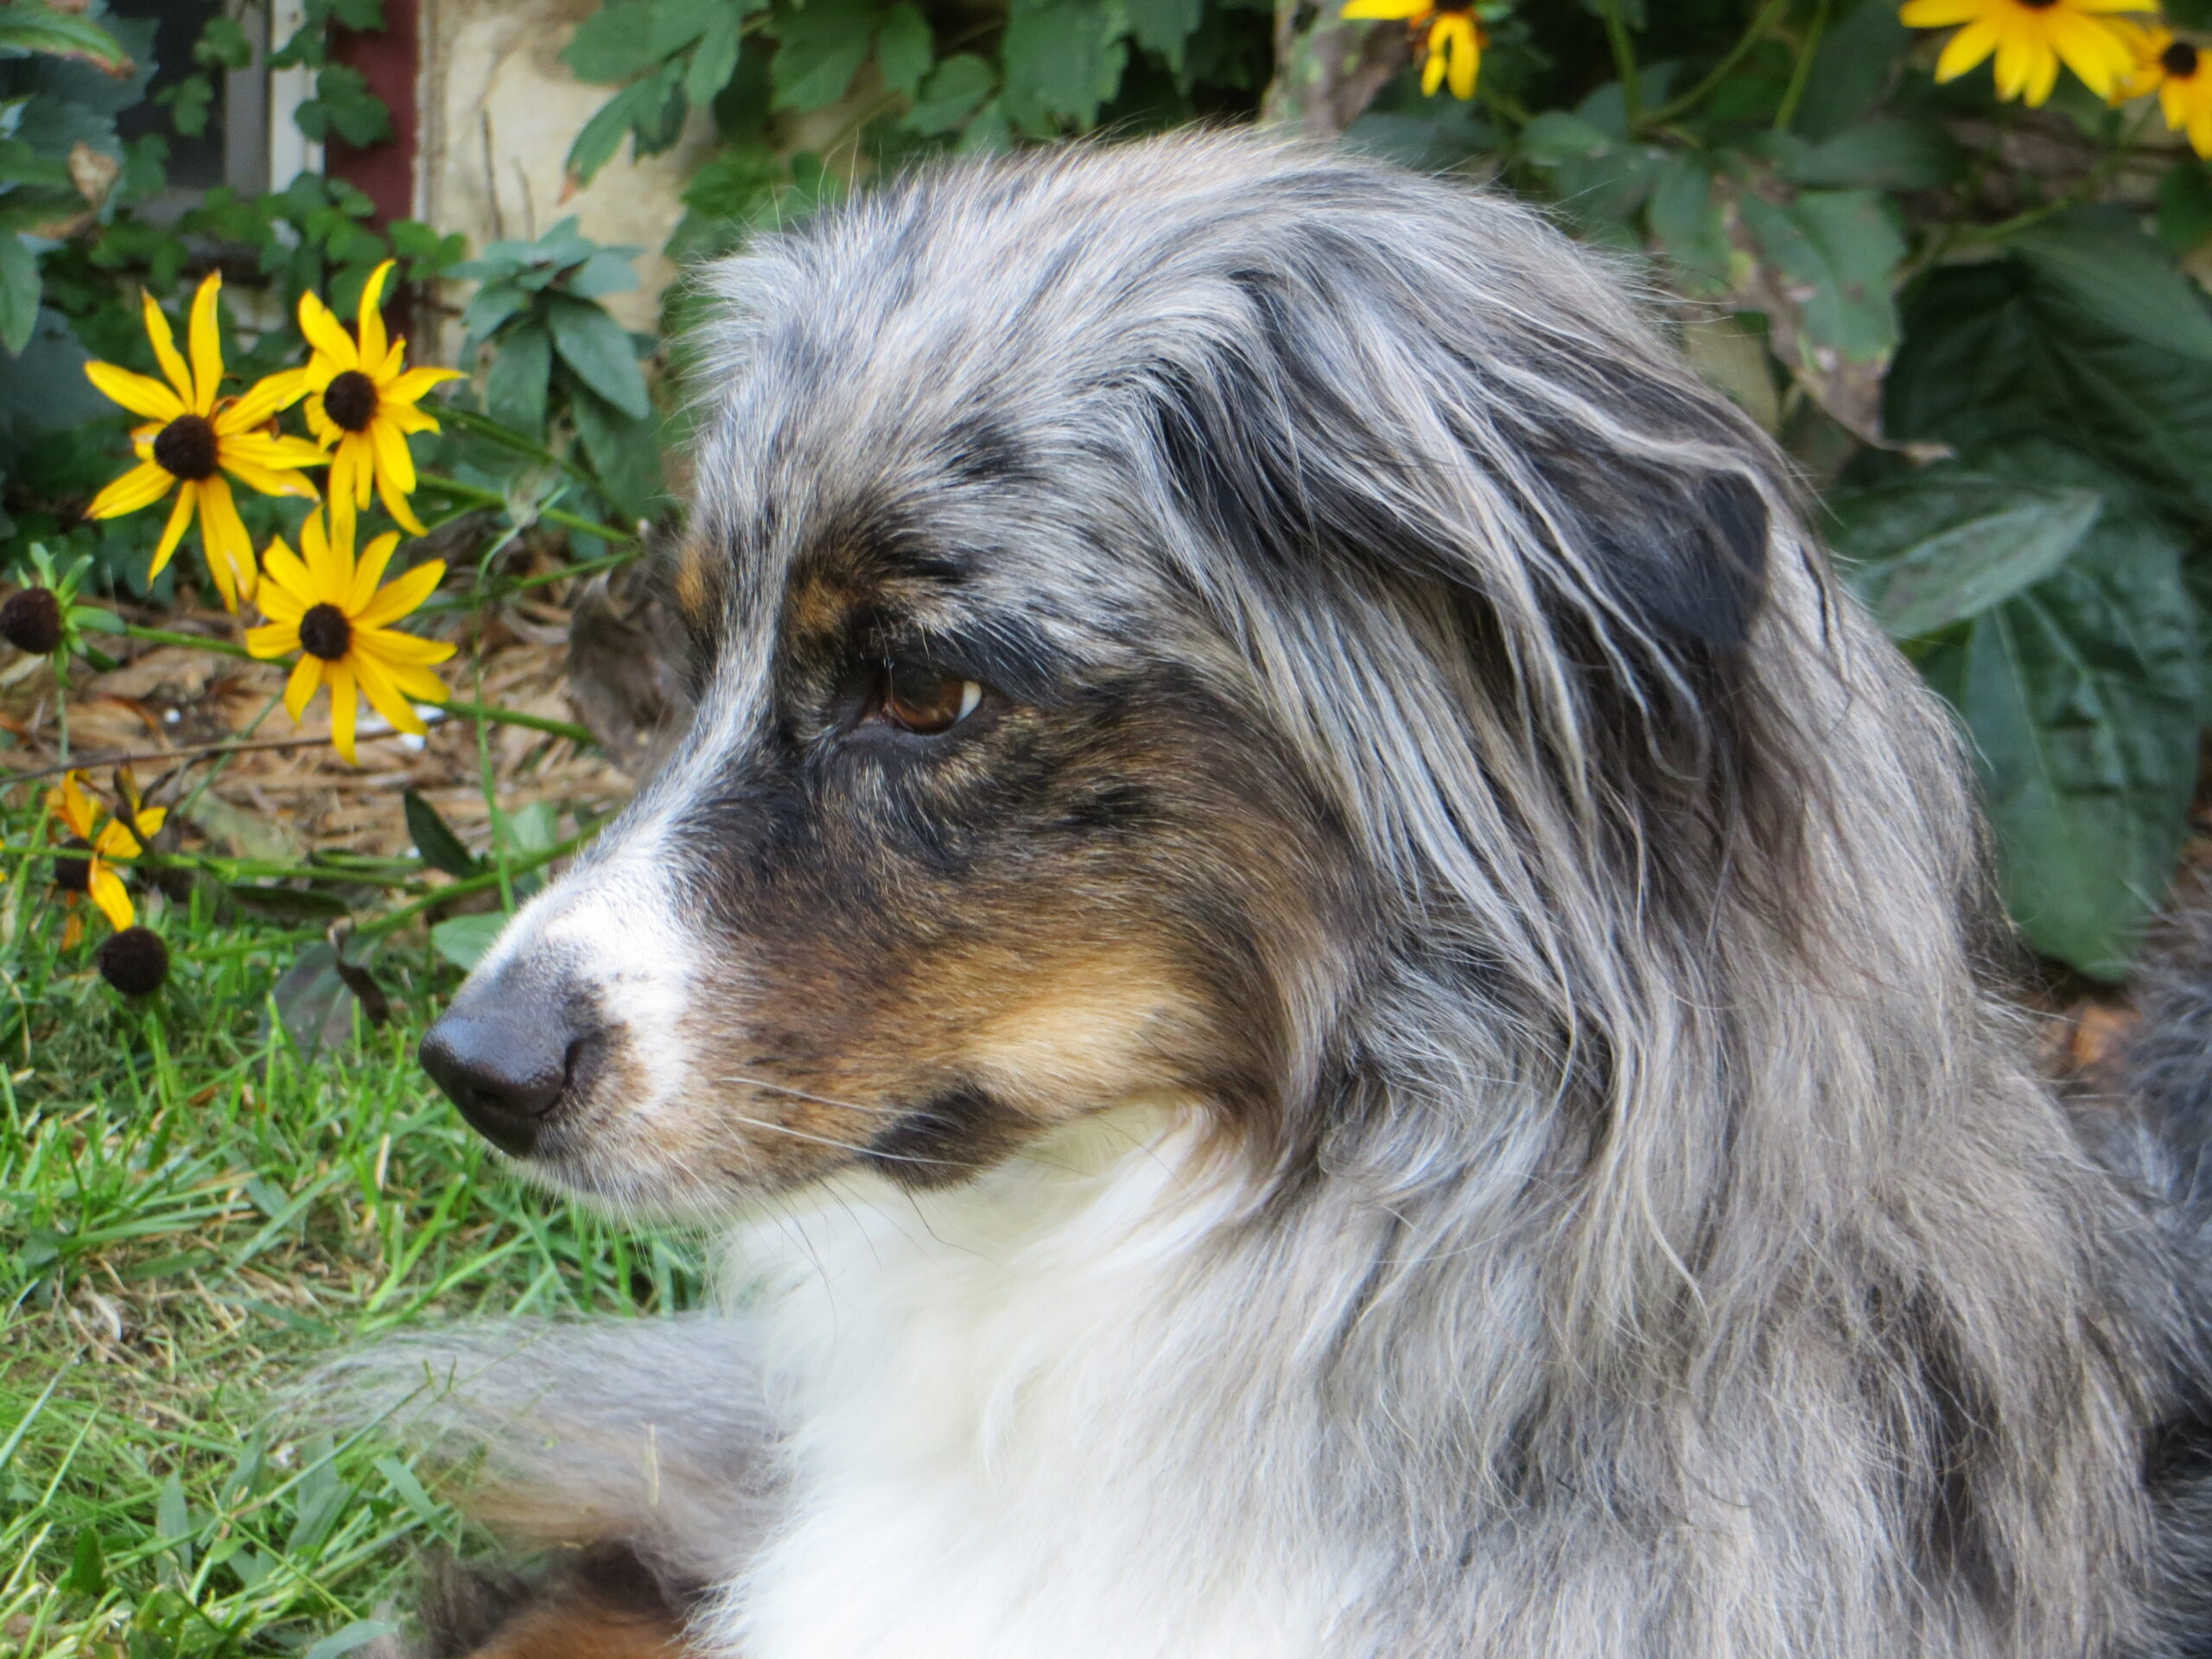 online courses image is of a head shot of a blue merle Australian shepherd on a greenery and yellow flowers background